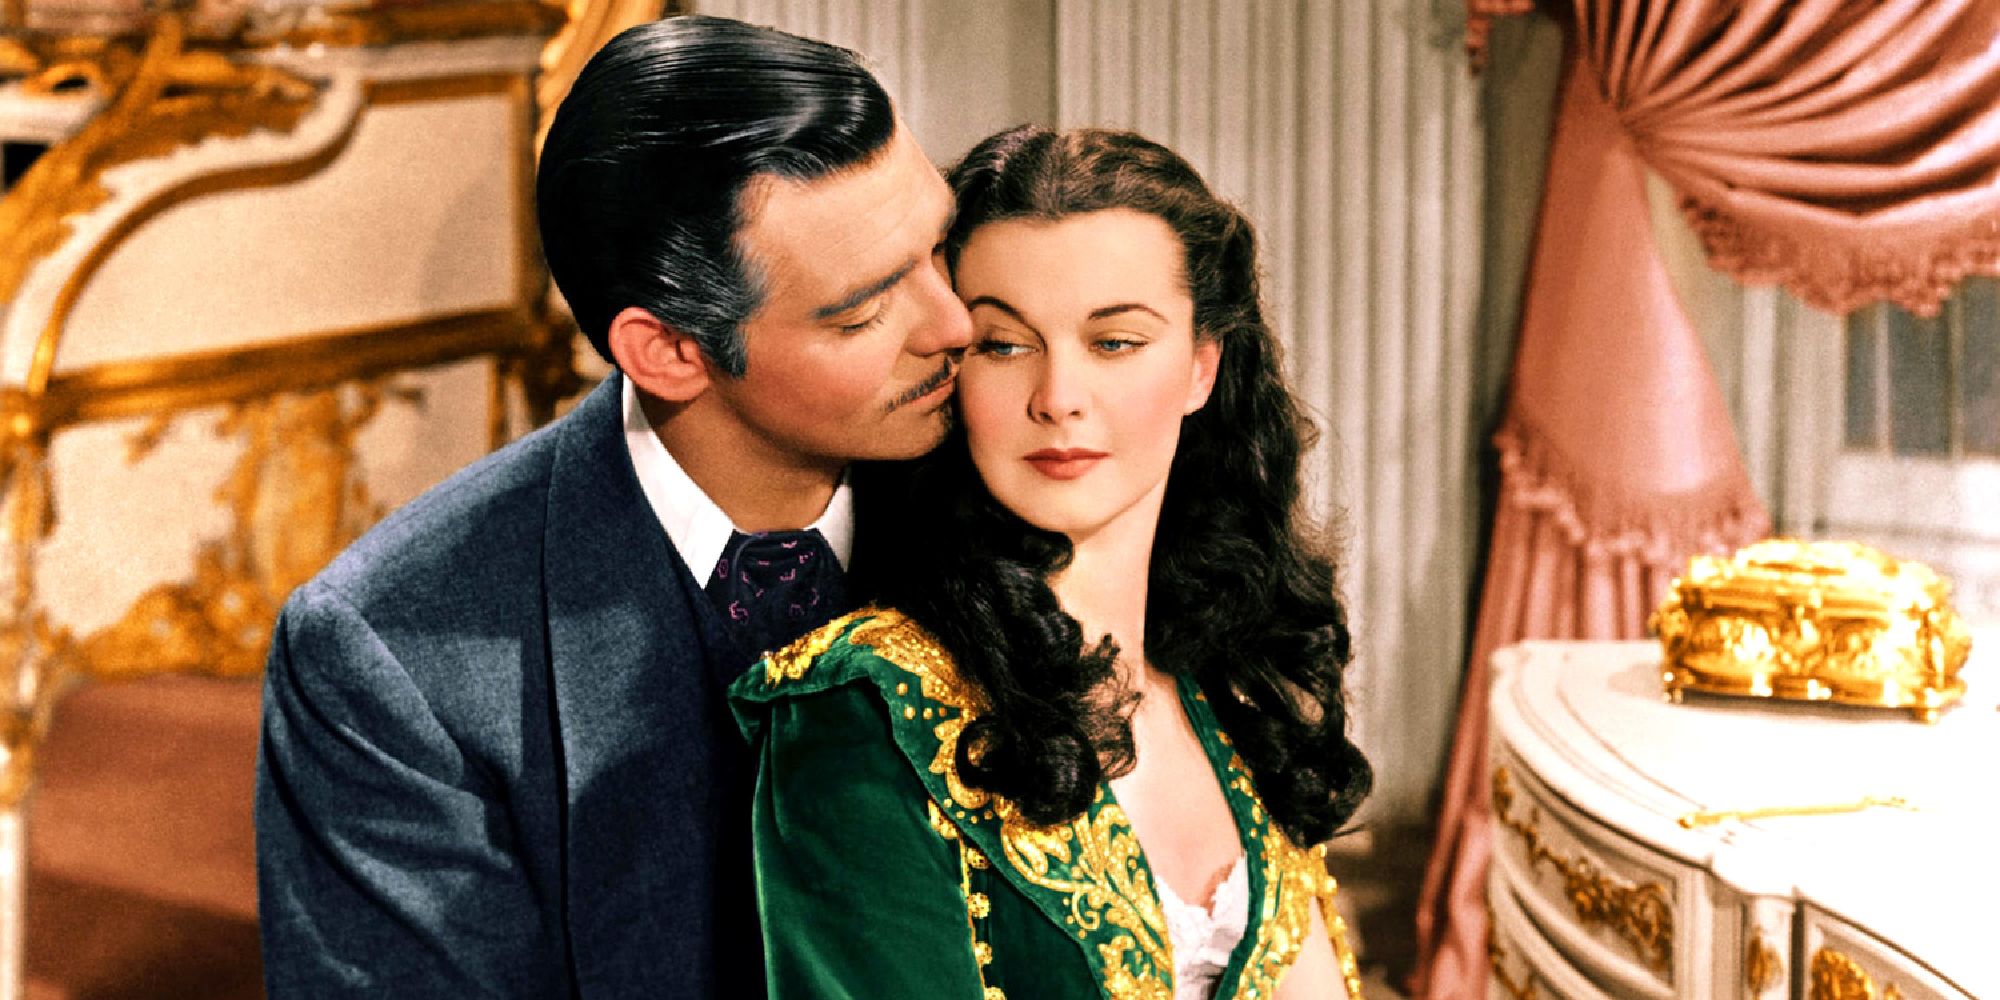 Clark Gable and Vivien Leigh as Red and Scarlett embracing in Gone With the Wind